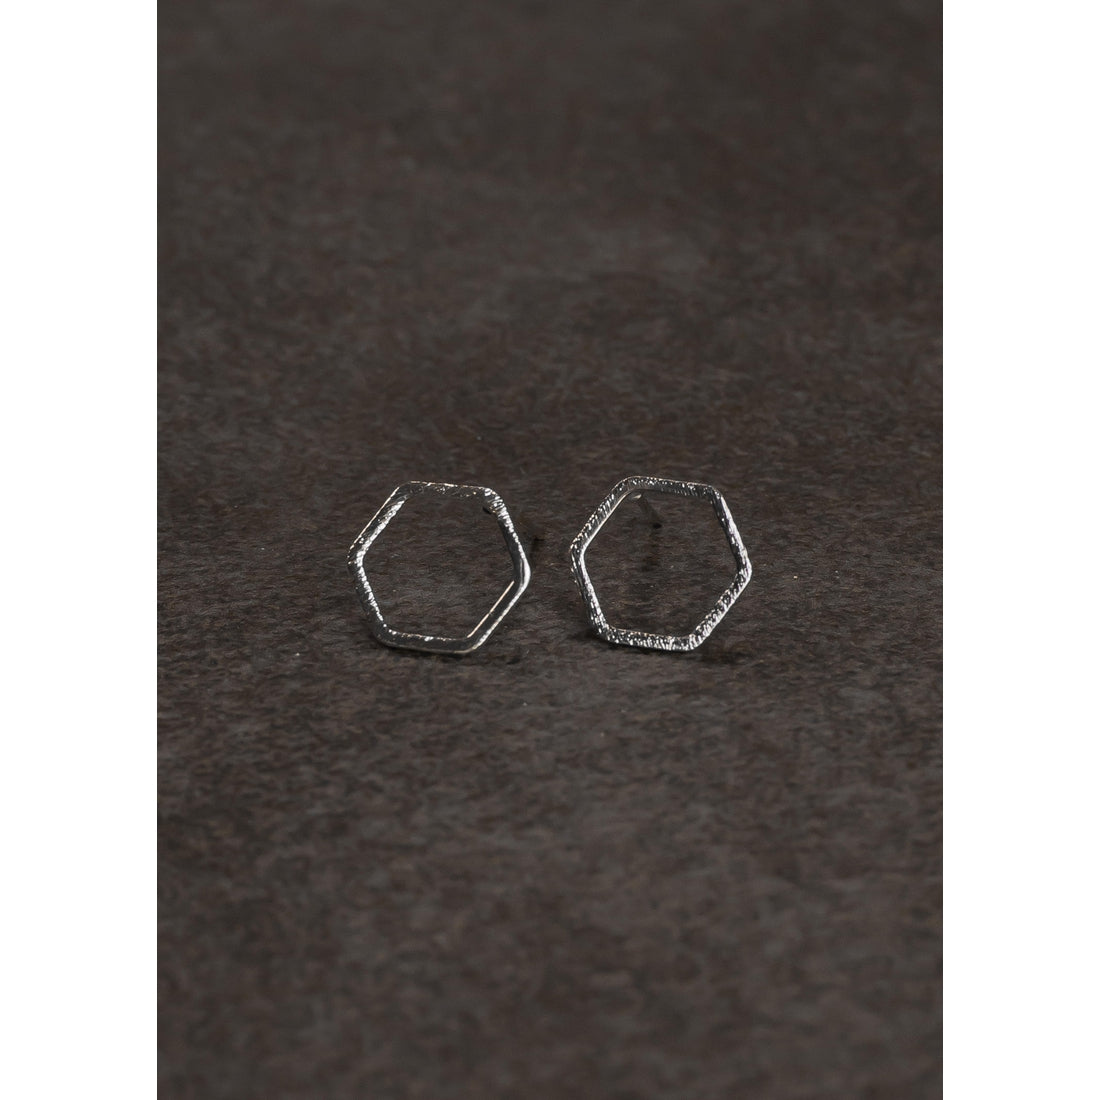 Stud Earrings - 12 different shapes